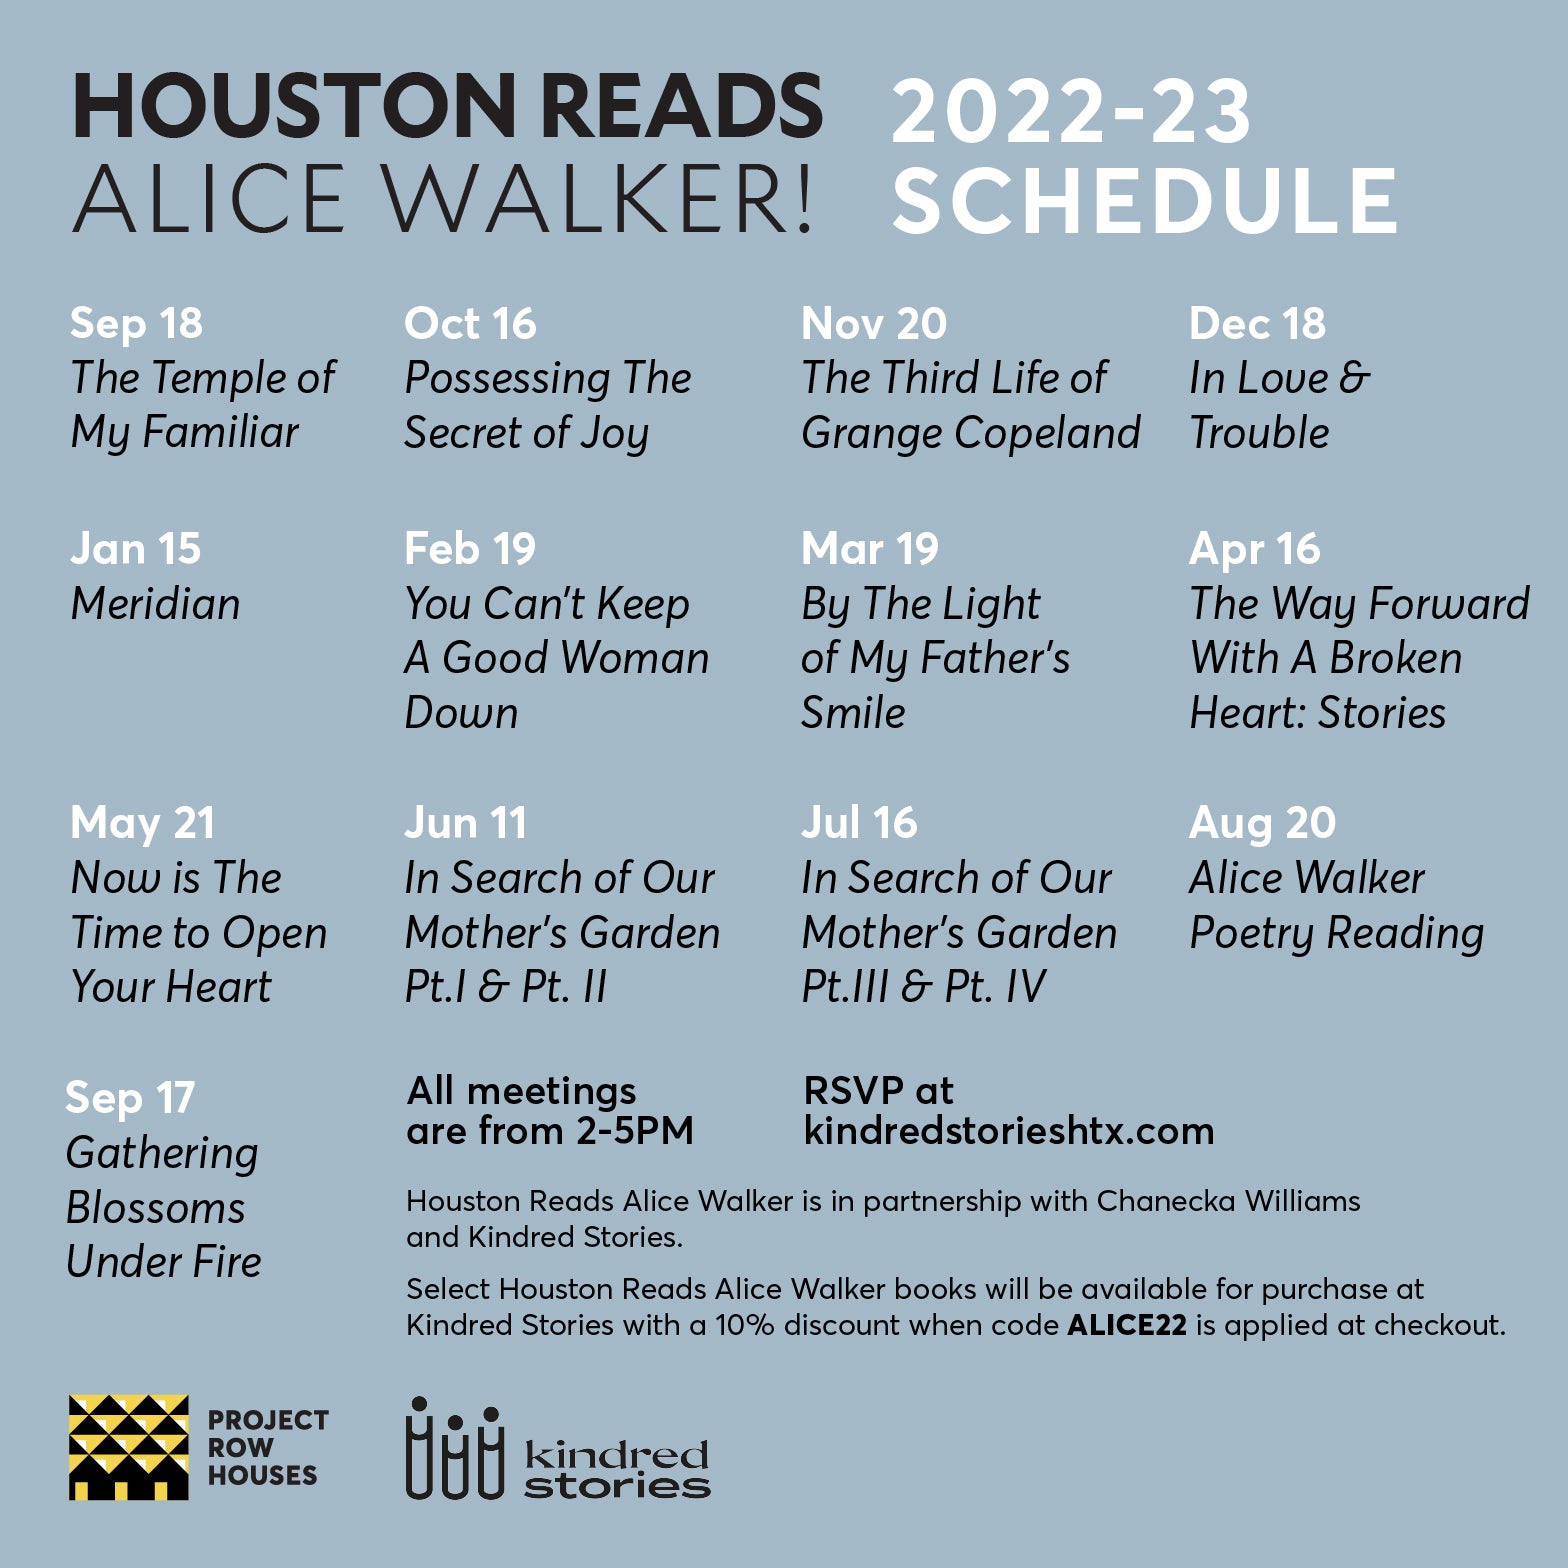 Houston Reads Alice Walker! Presented by Project Row Houses, Kindred Stories, and Chanecka Williams